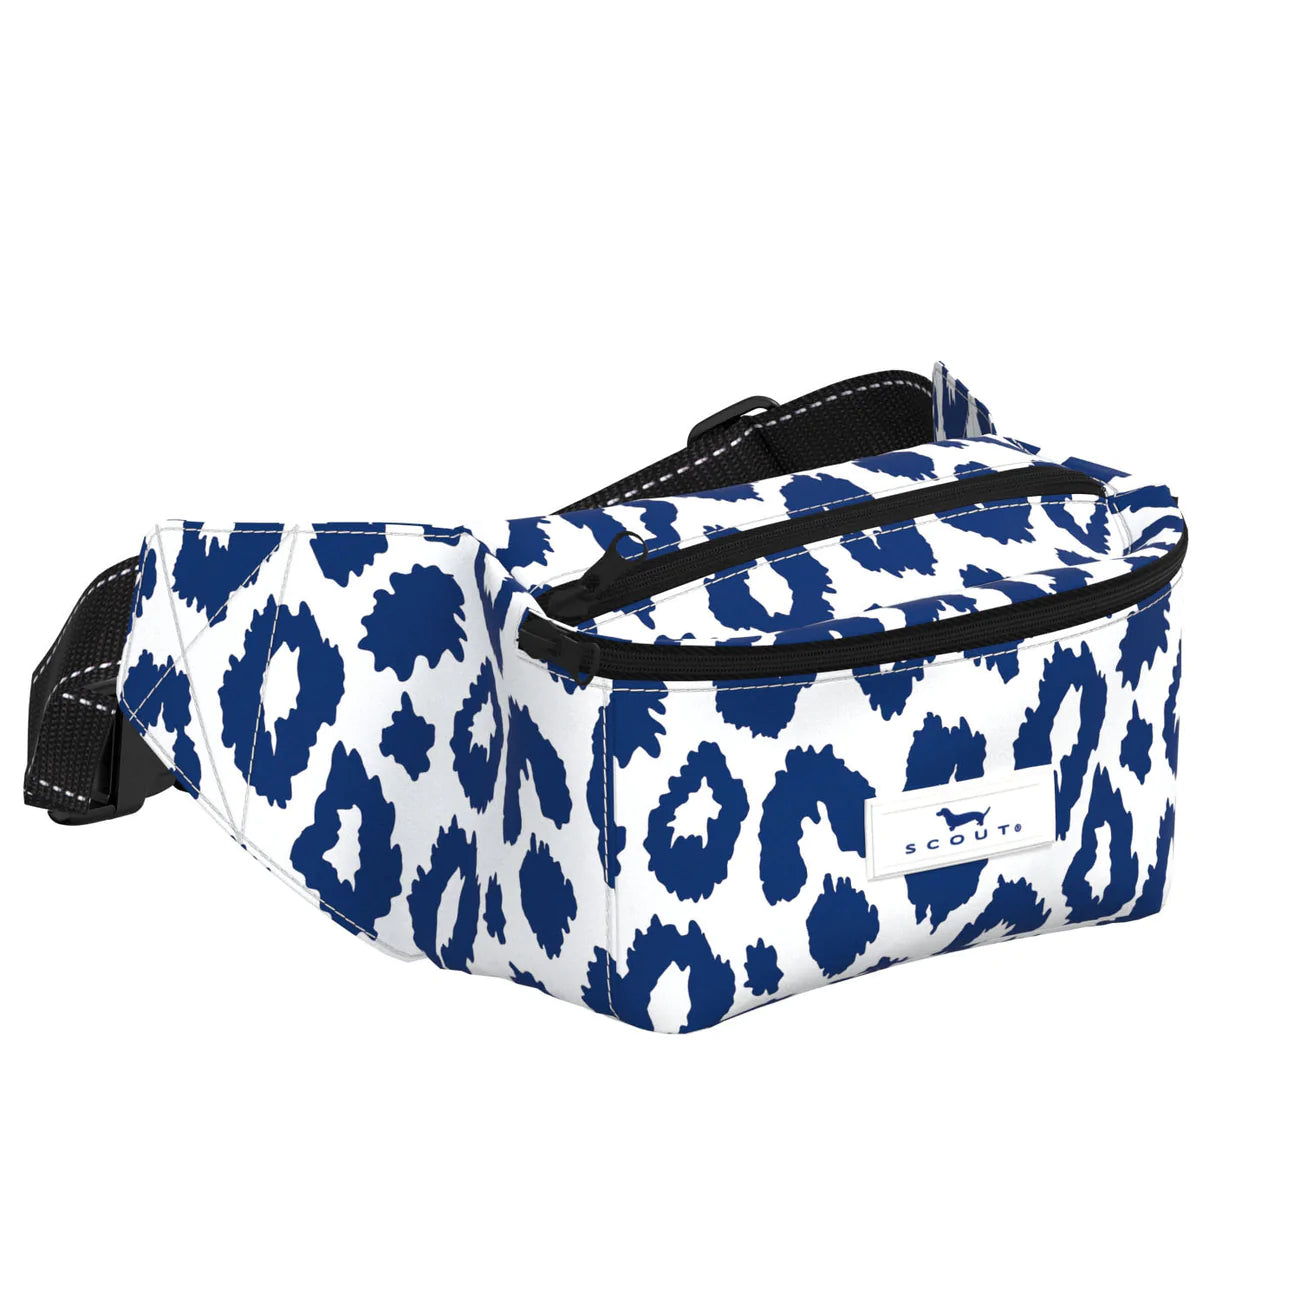 Hipster Fanny Pack by Scout - Pawdon Me